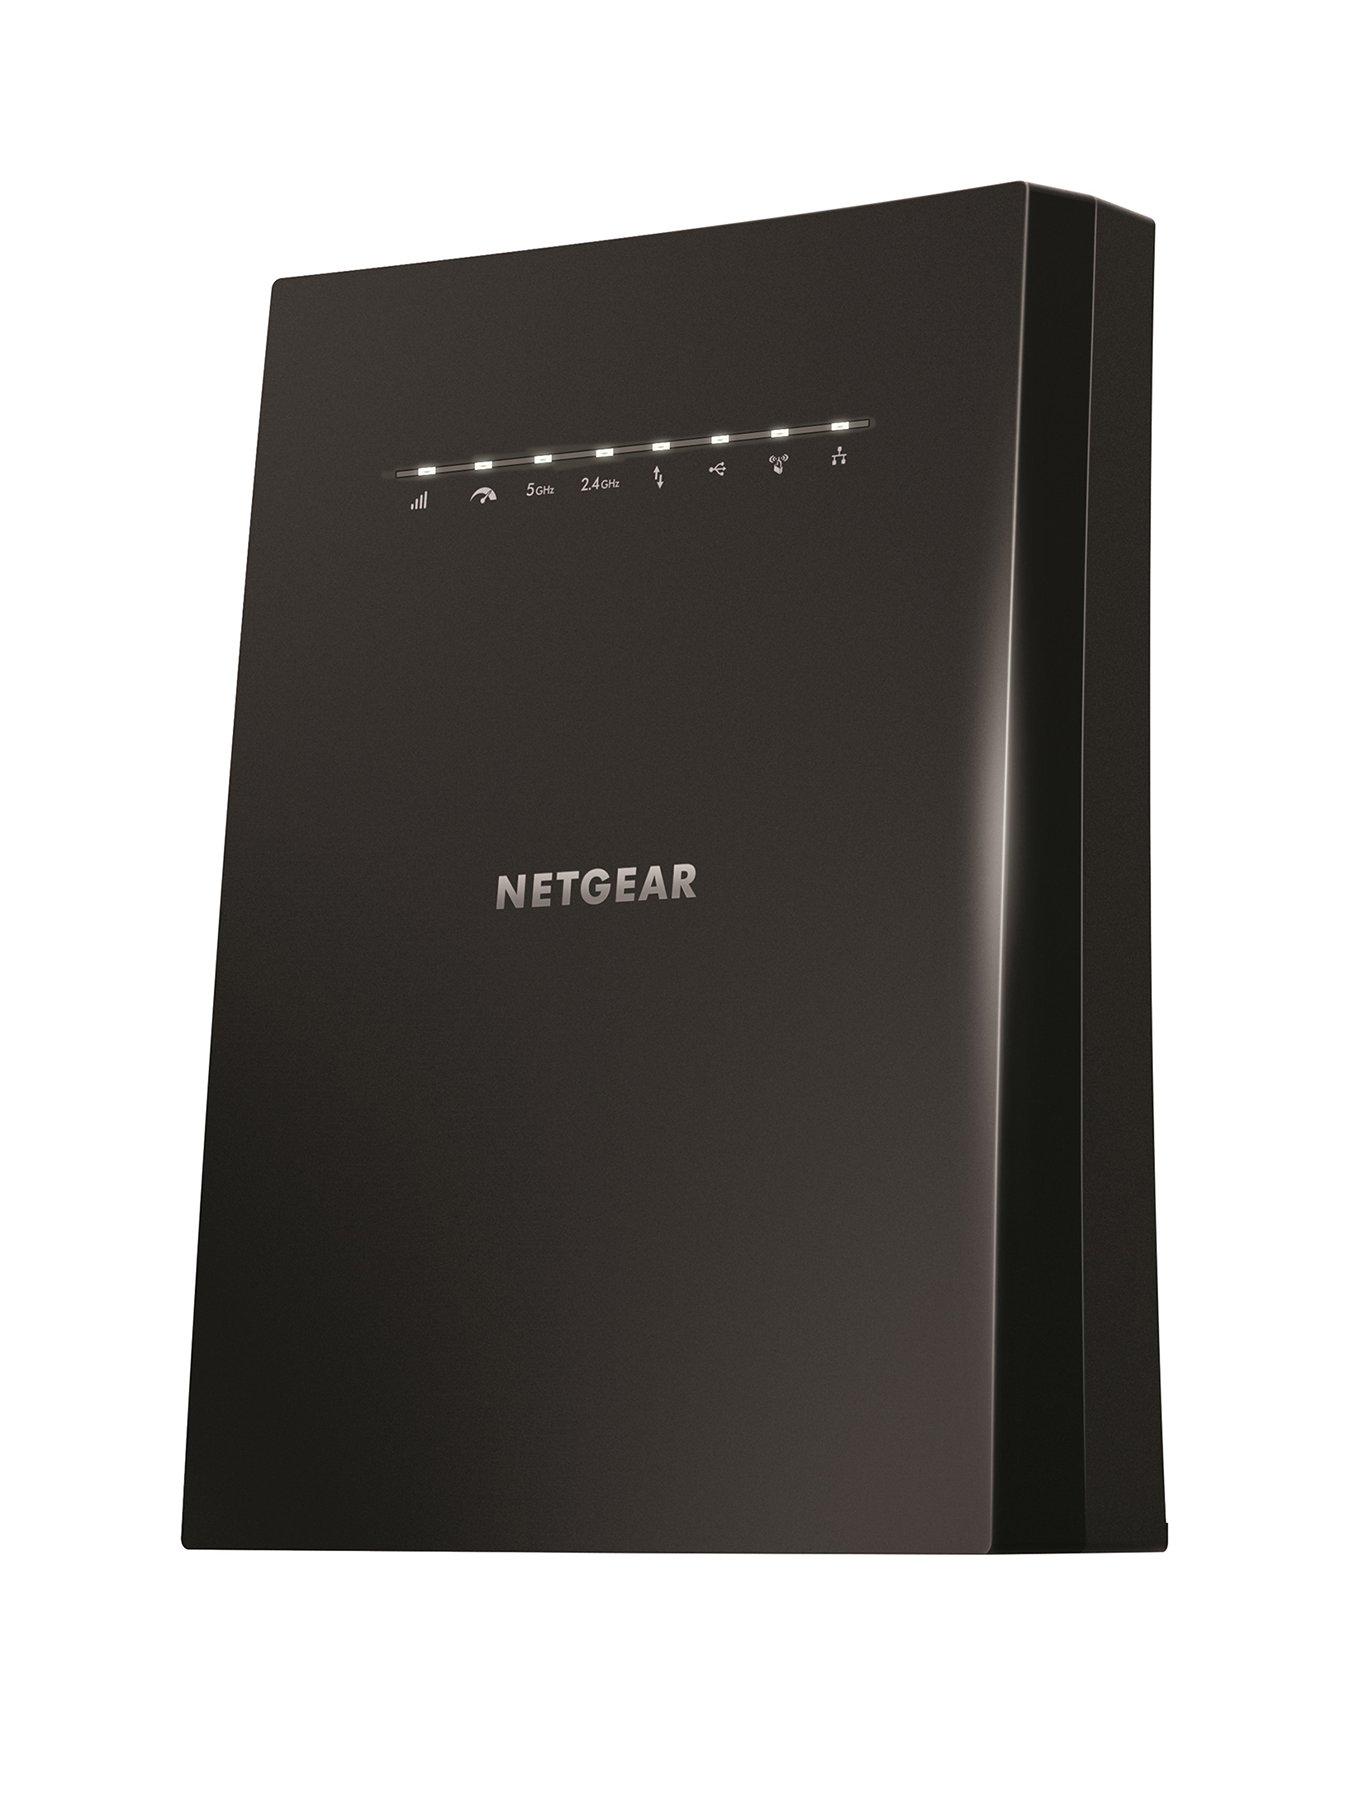 Netgear Ac3000 Mbps Nighthawk Meshtri-Band Wi-Fi Range Extender With Fastlane3, 1 Wi-Fi Name And Access Point Mode (Smart Mesh Roaming For Any Router)